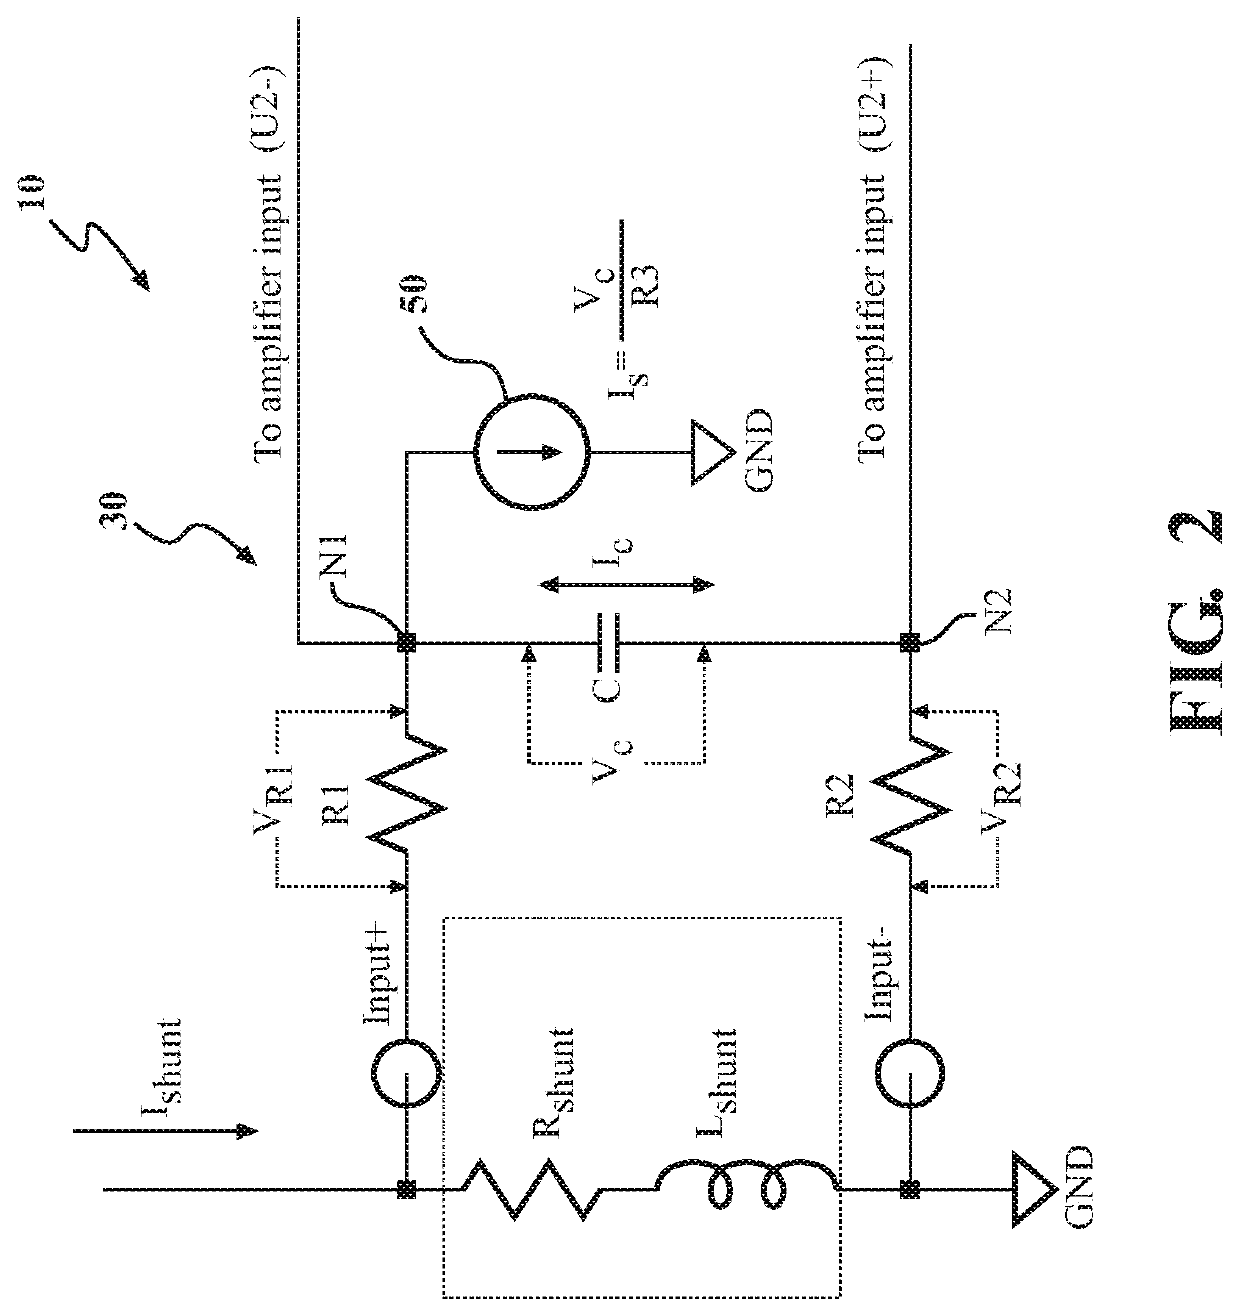 Circuit and method for shunt current sensing